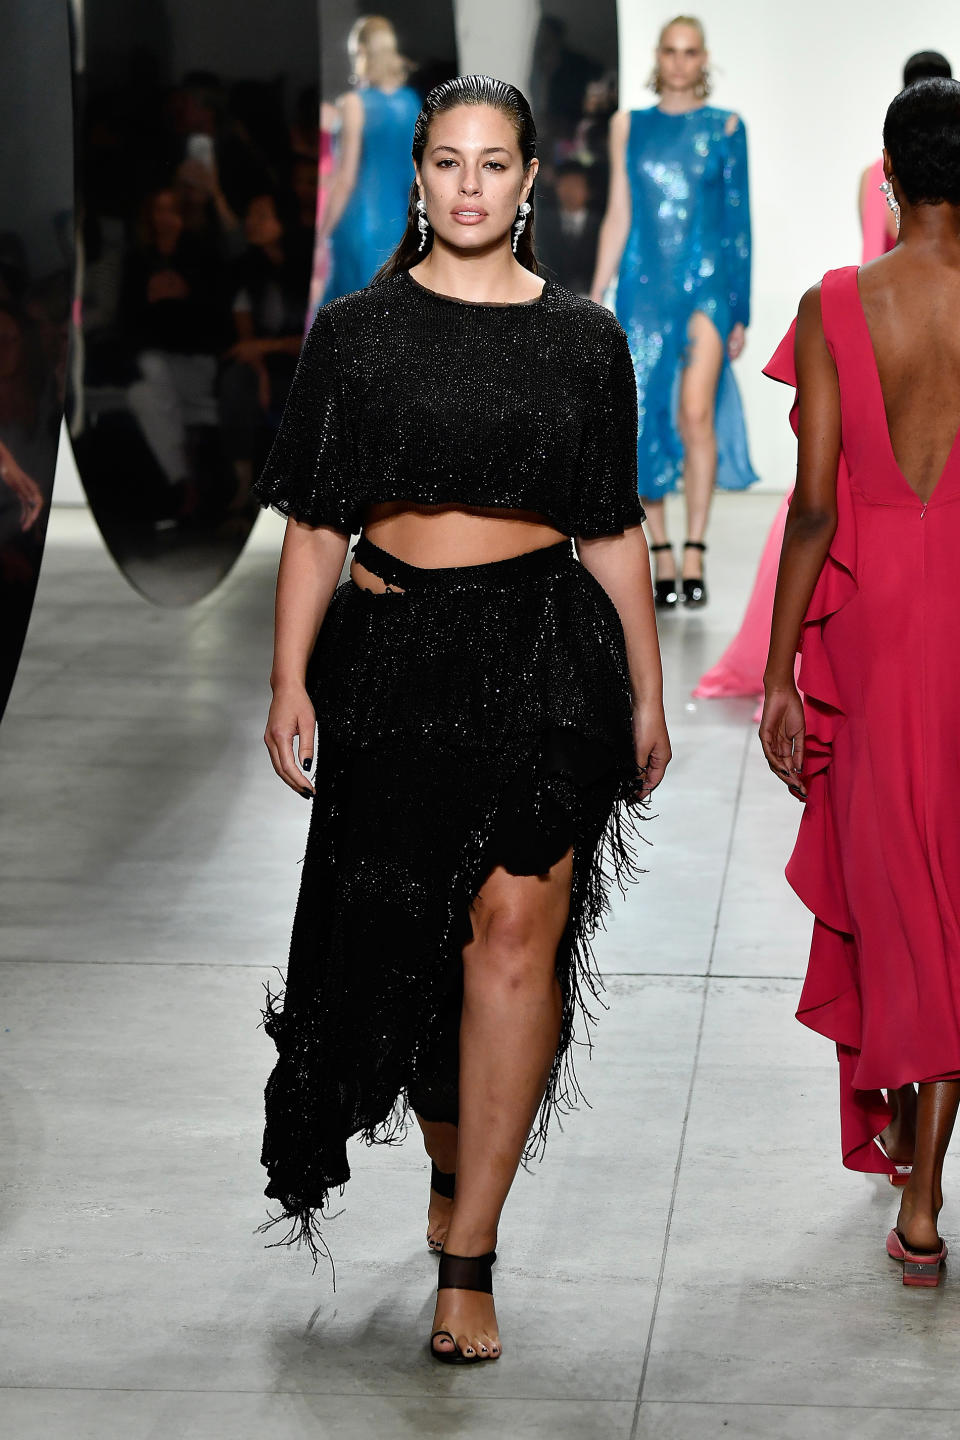 Curvy model Ashley Graham walks the runway during the Prabal Gurung Spring 2018 show. (Photo: Getty Images)